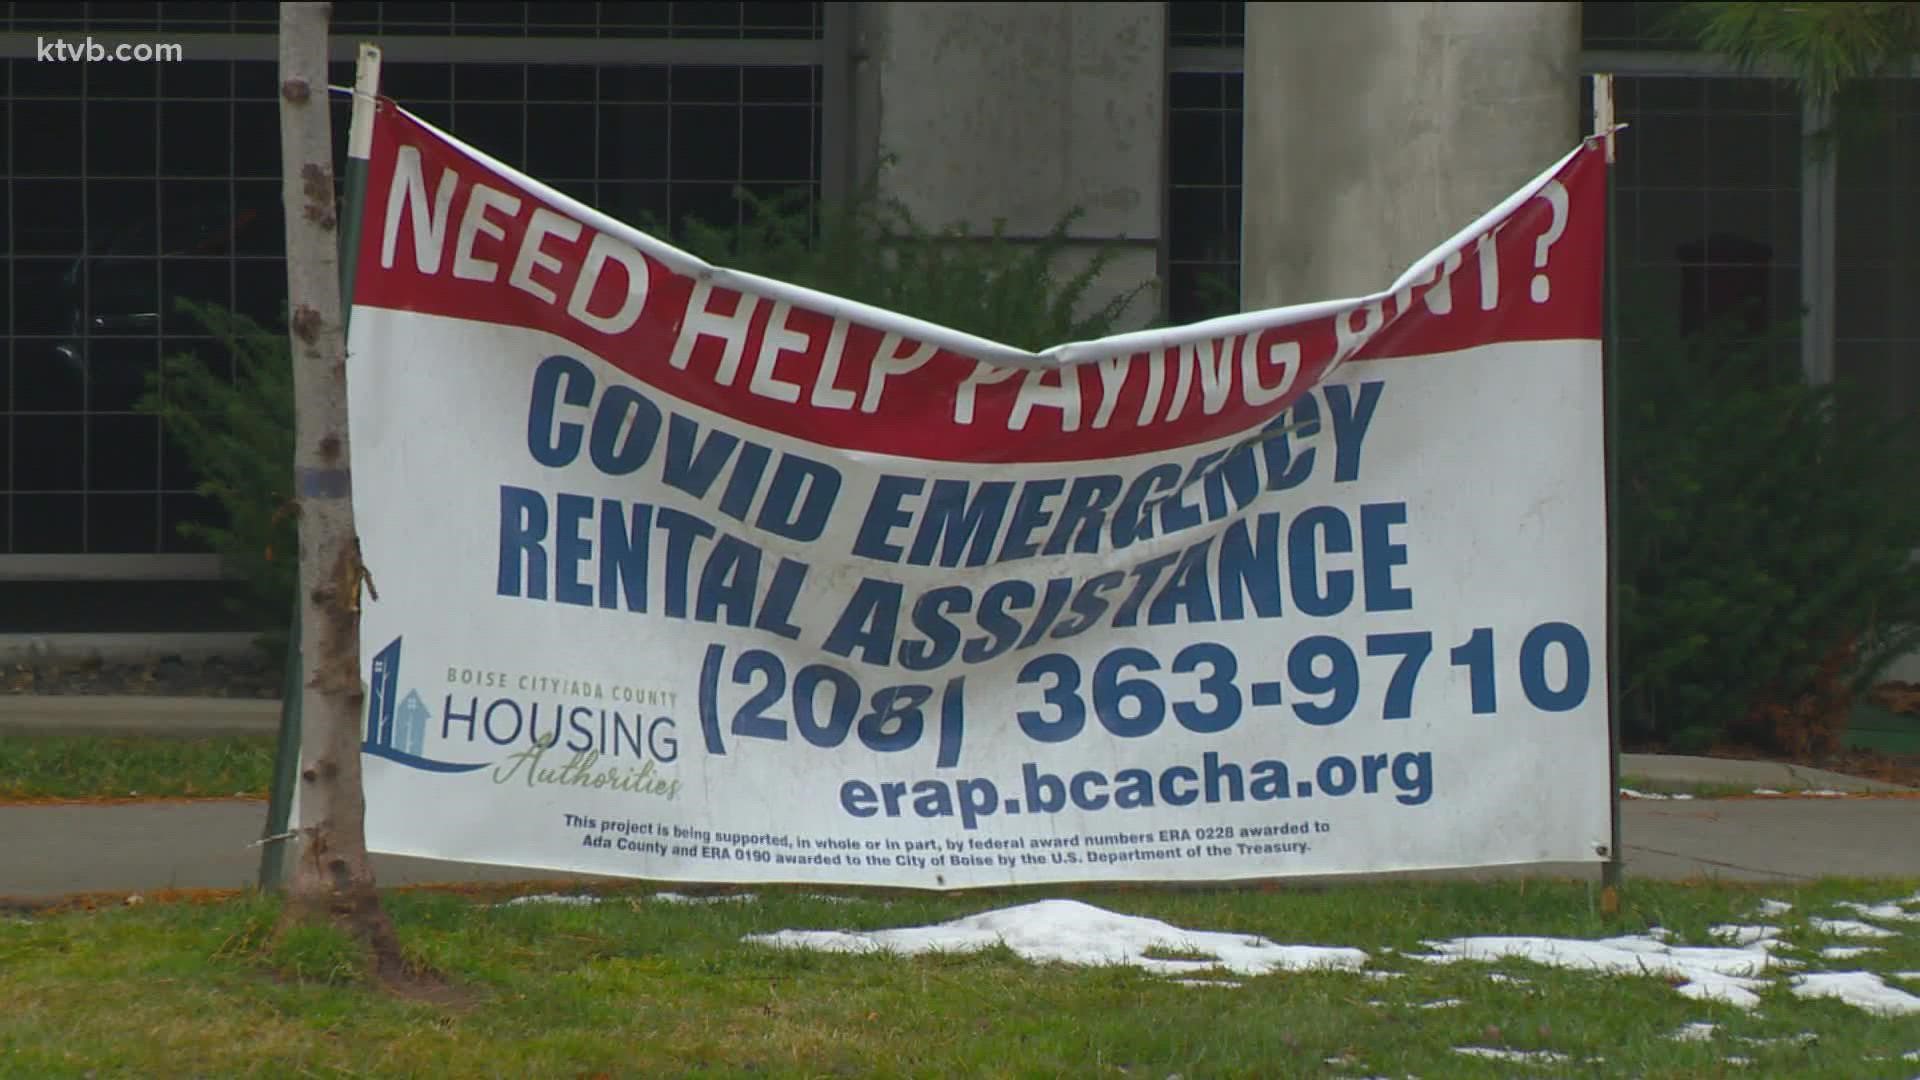 To qualify for the federal Emergency Rental Assistance Program, an applicant can make no more than 80% of the area's median income, leaving some people behind.